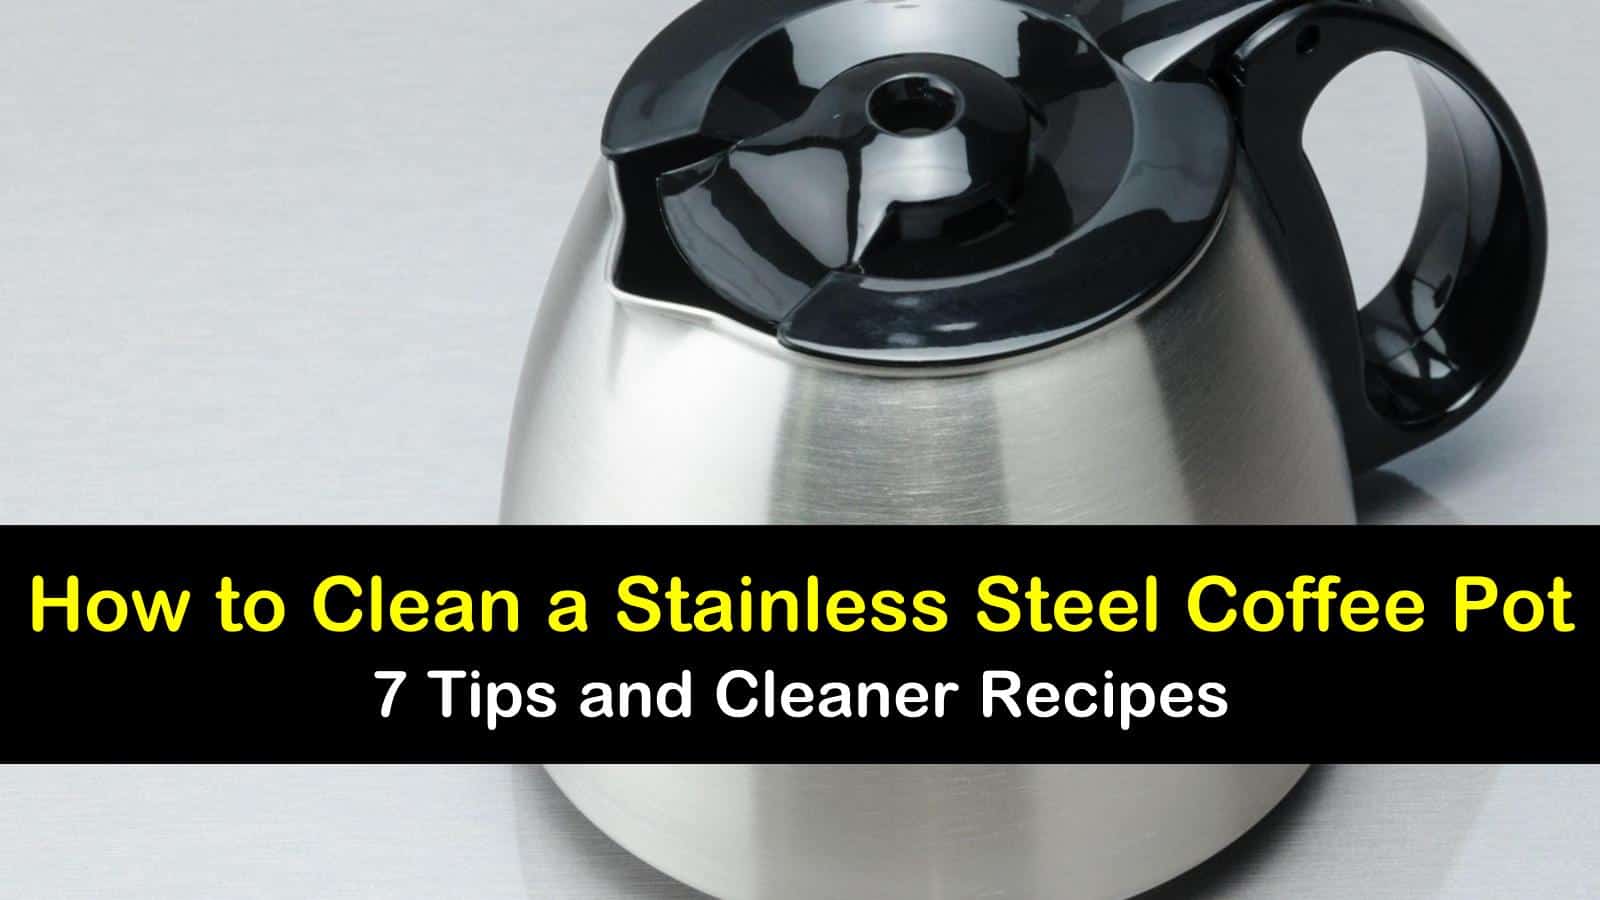 how to clean a stainless steel coffee pot titleimg1